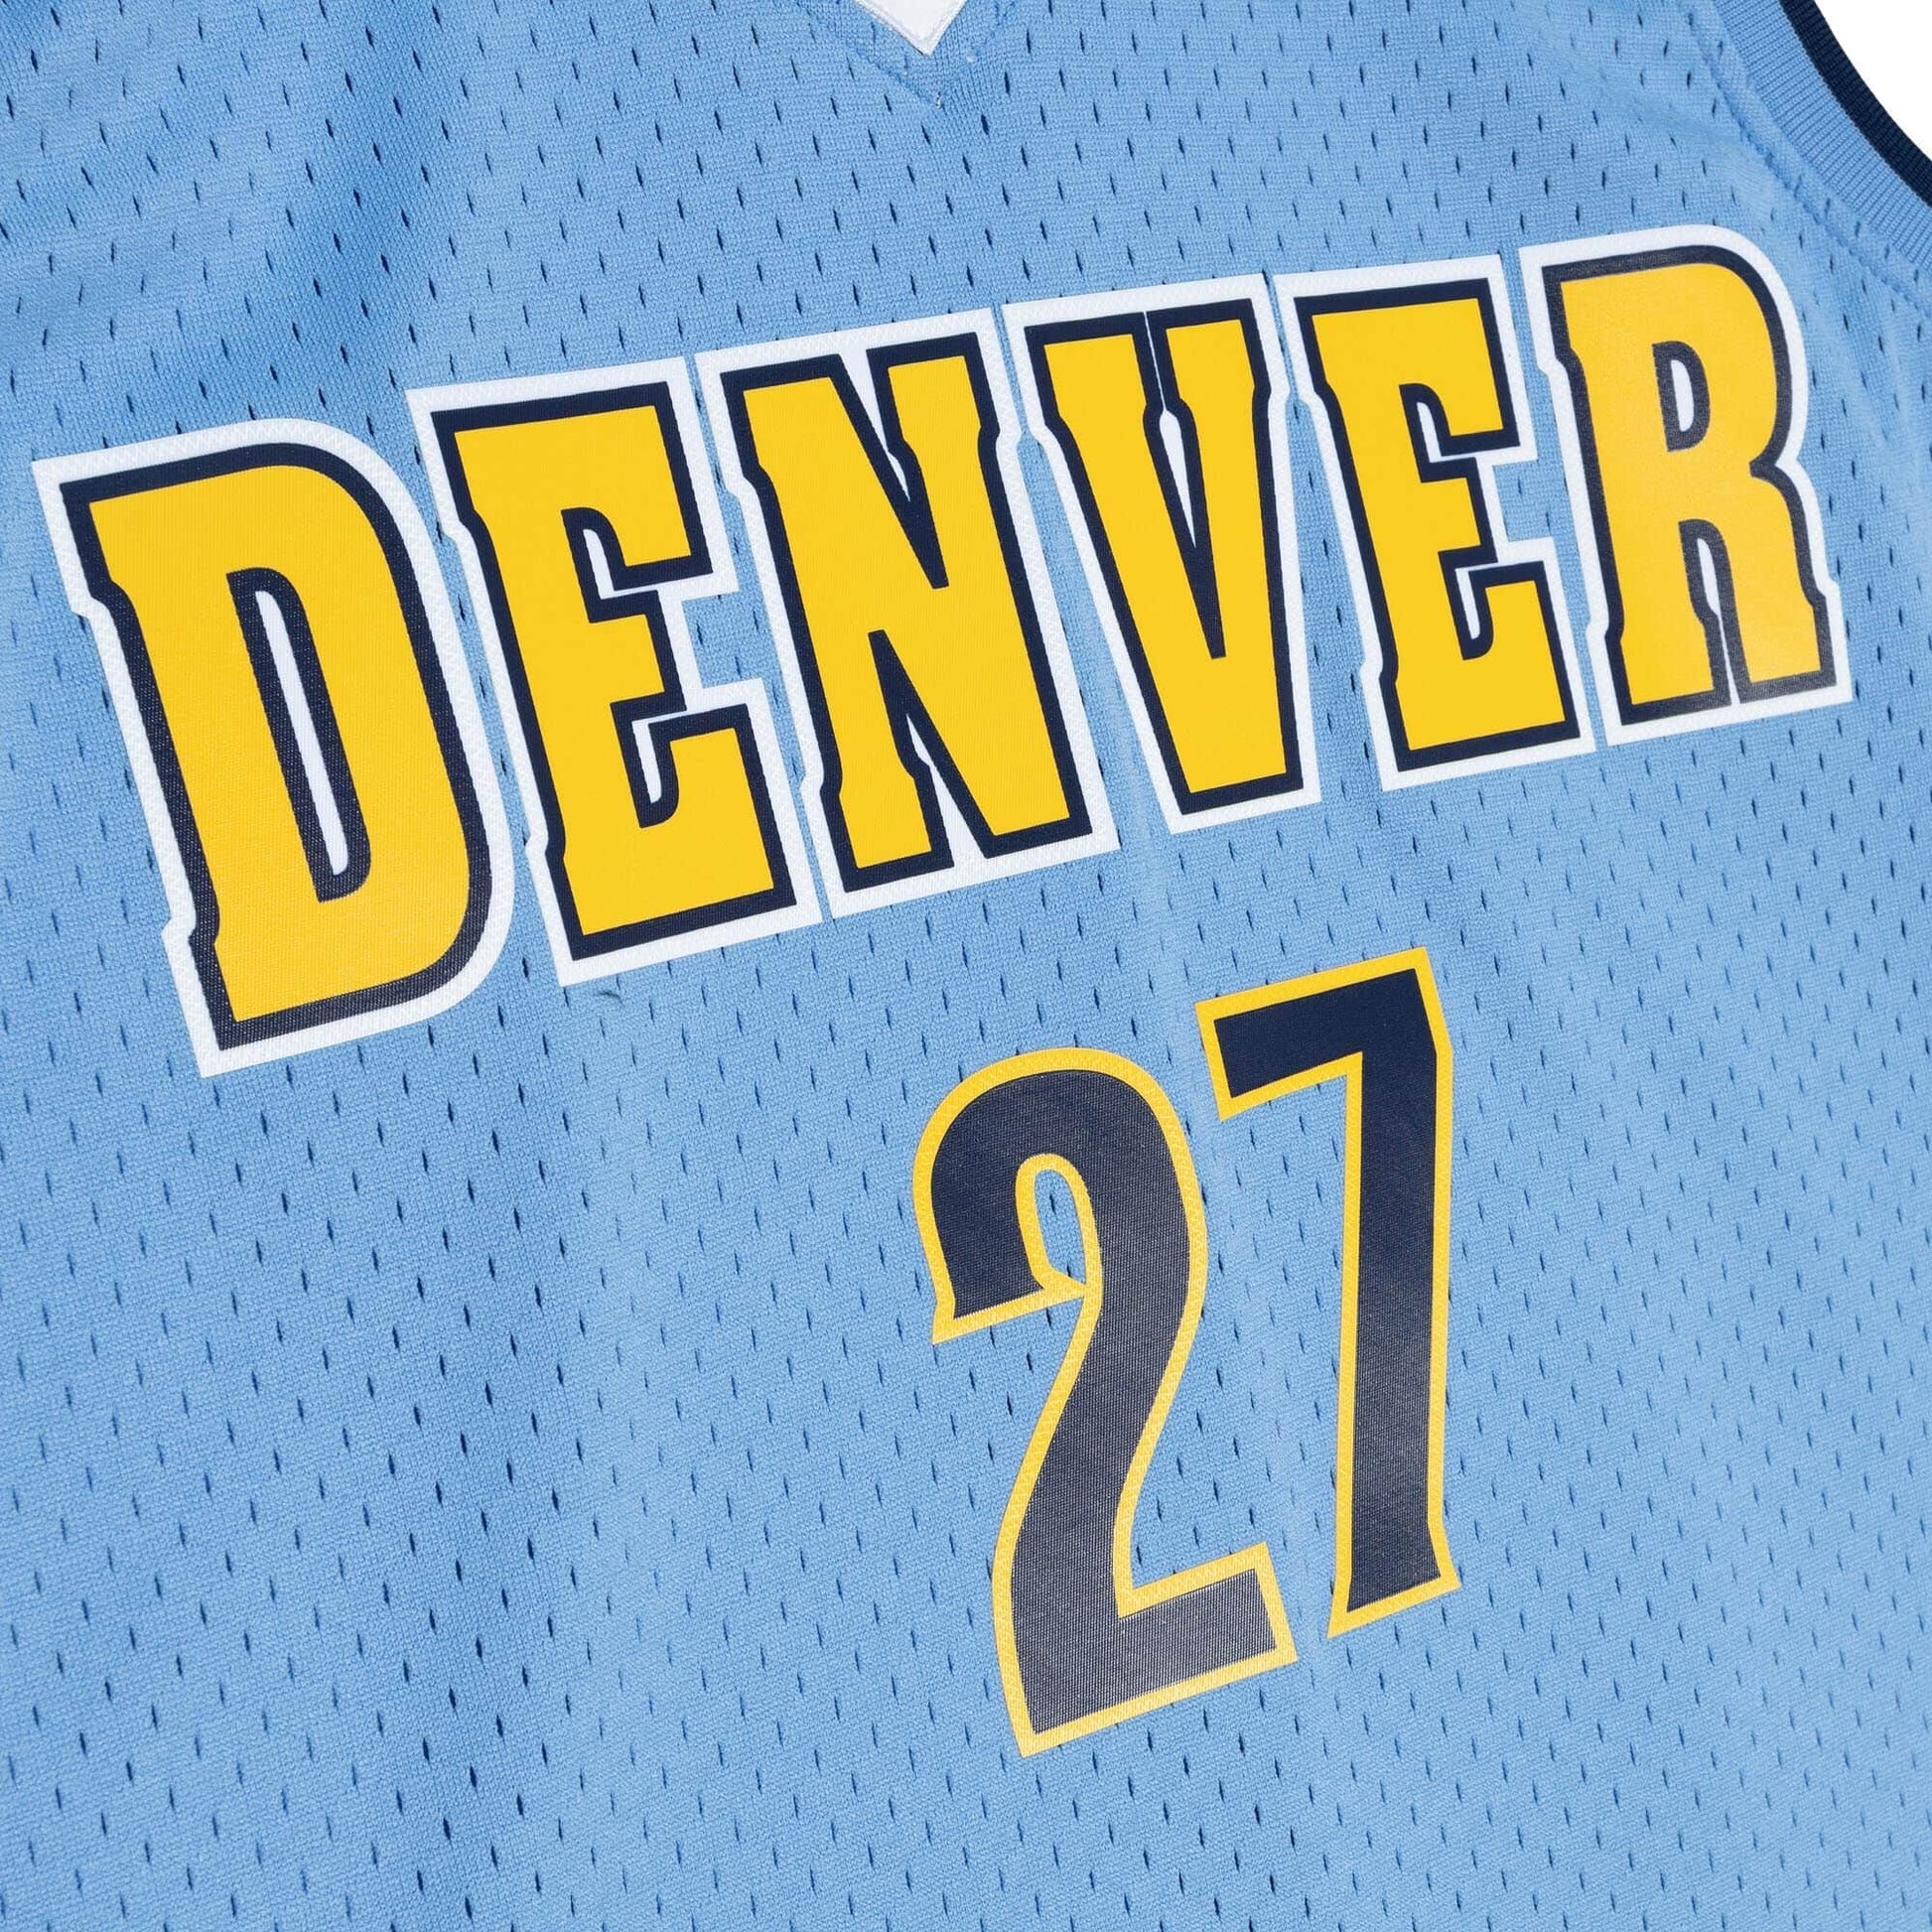  Jamal Murray Denver Nuggets Navy #27 Youth 8-20 Home Edition  Swingman Player Jersey (14-16) : Sports & Outdoors